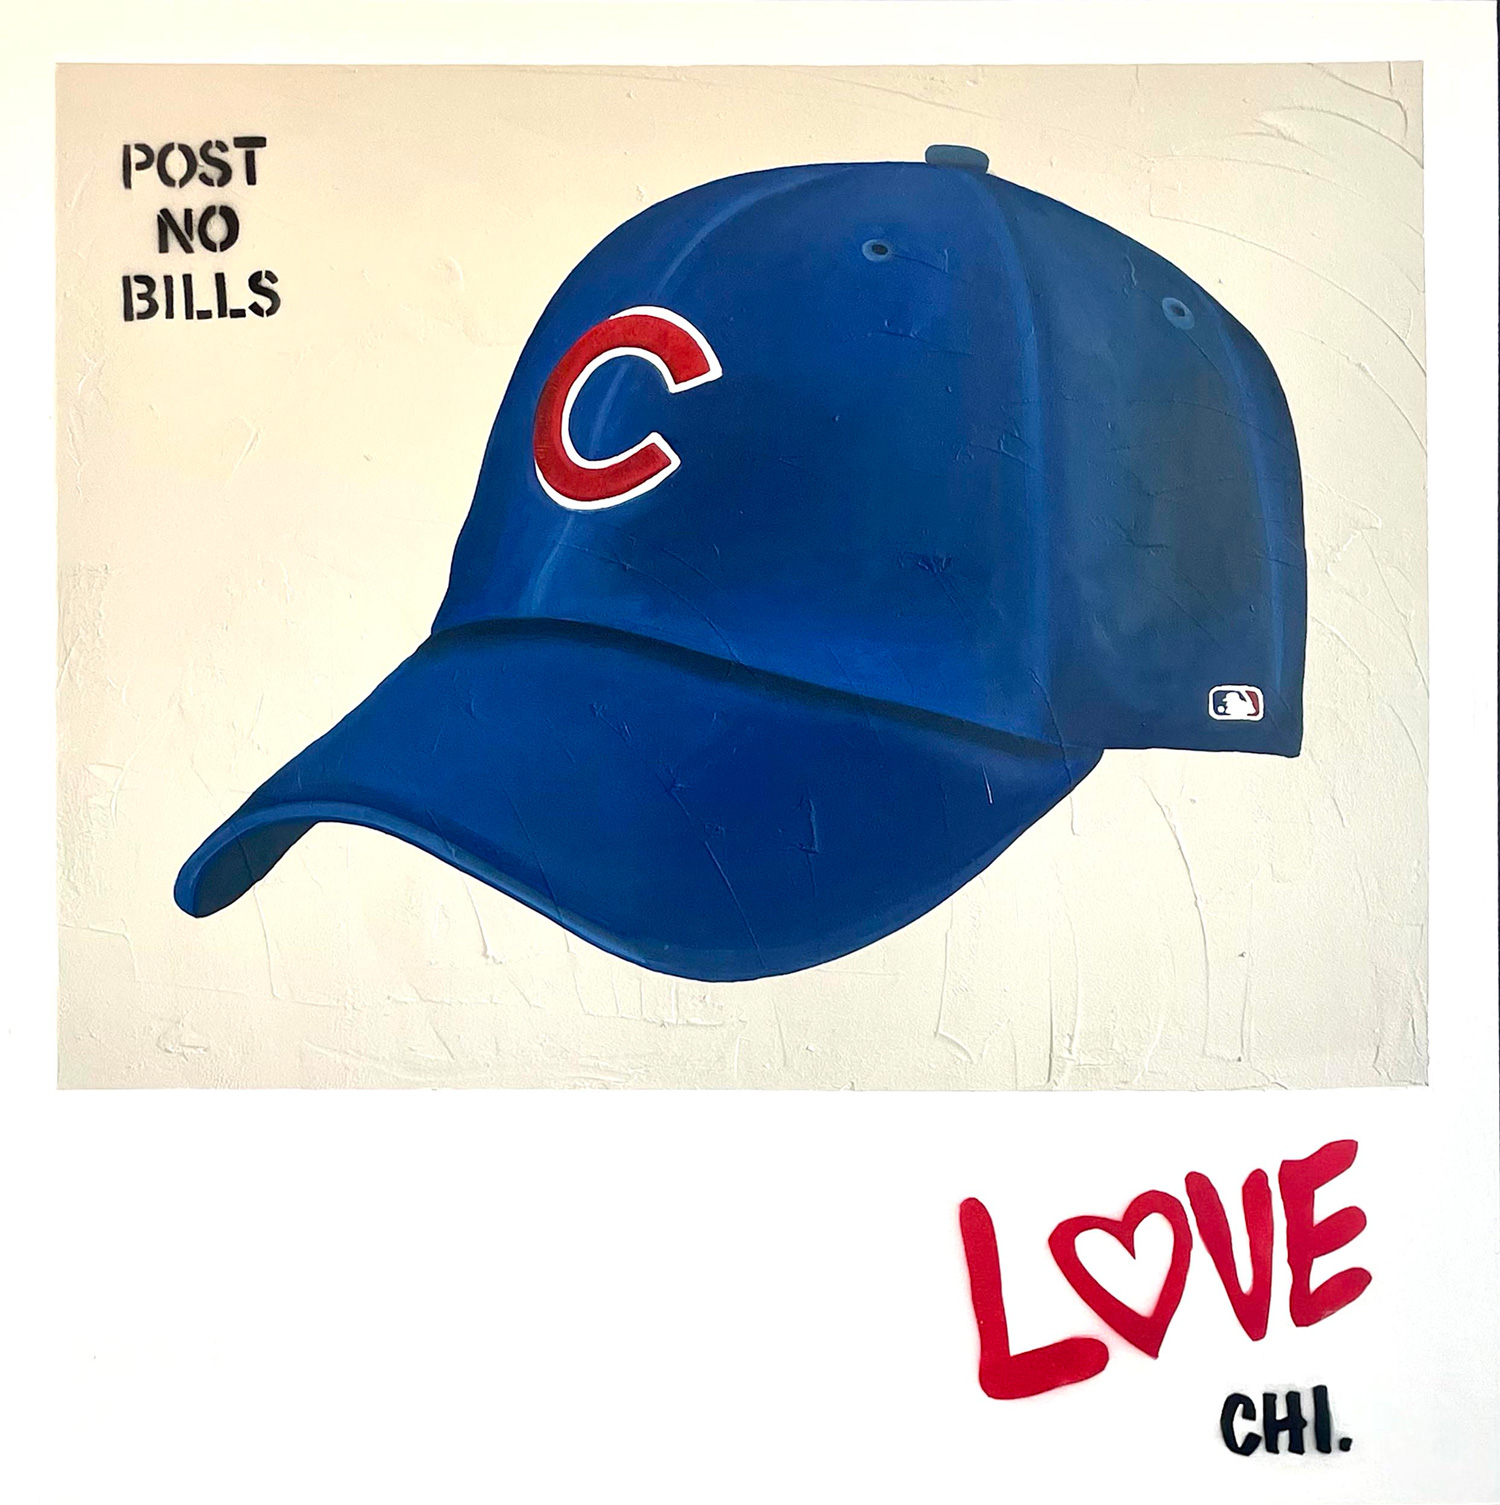 Chicaco Cubs hat